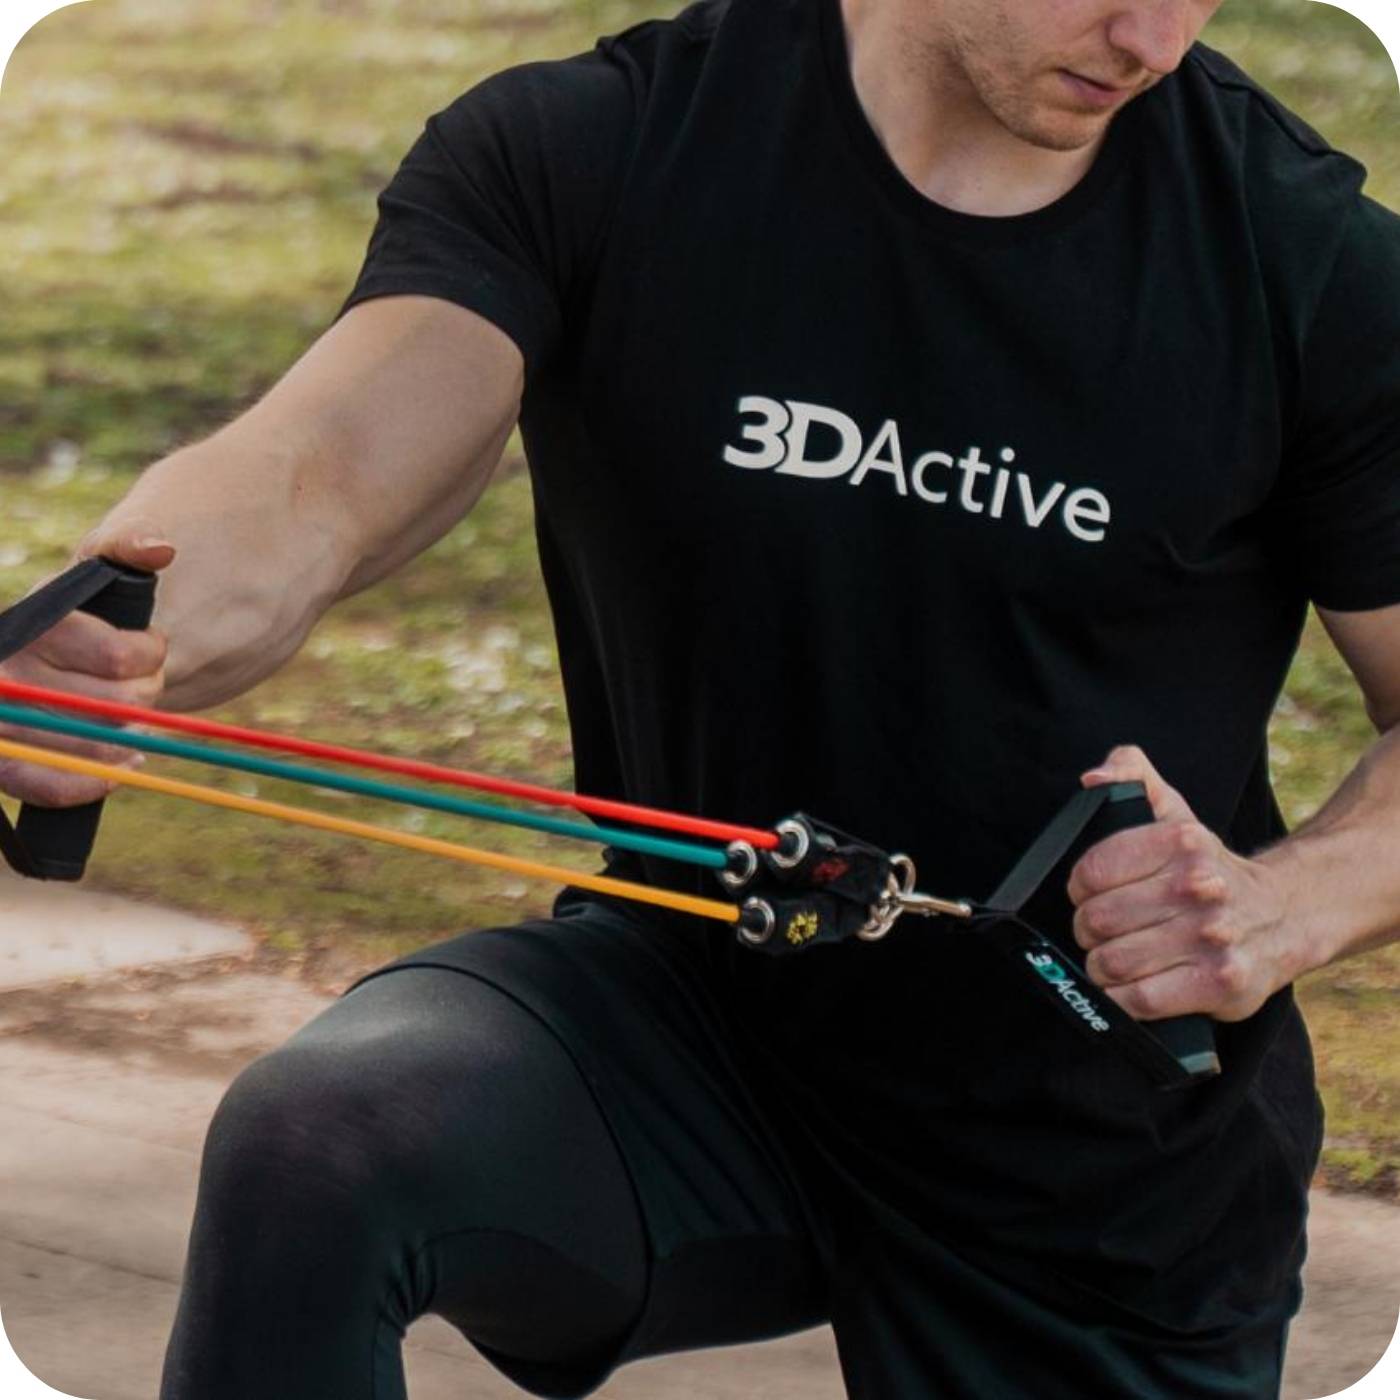 man using the 3dactive resistance bands with handles in the outdoor gym